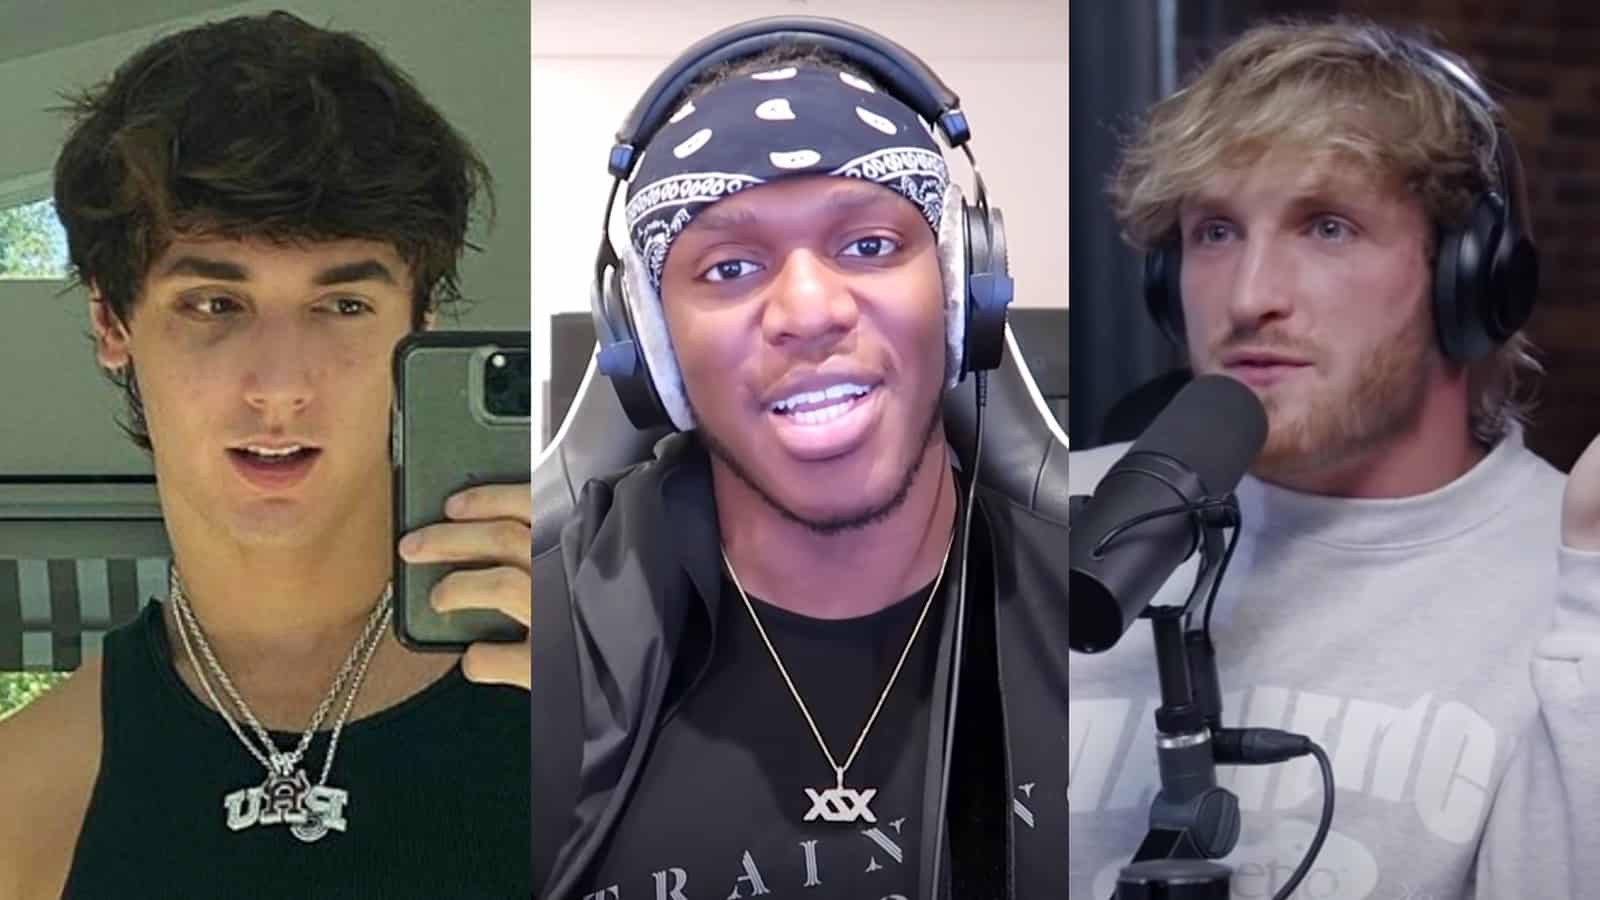 Images of KSI, Bryce Hall, and Logan Paul next to each other